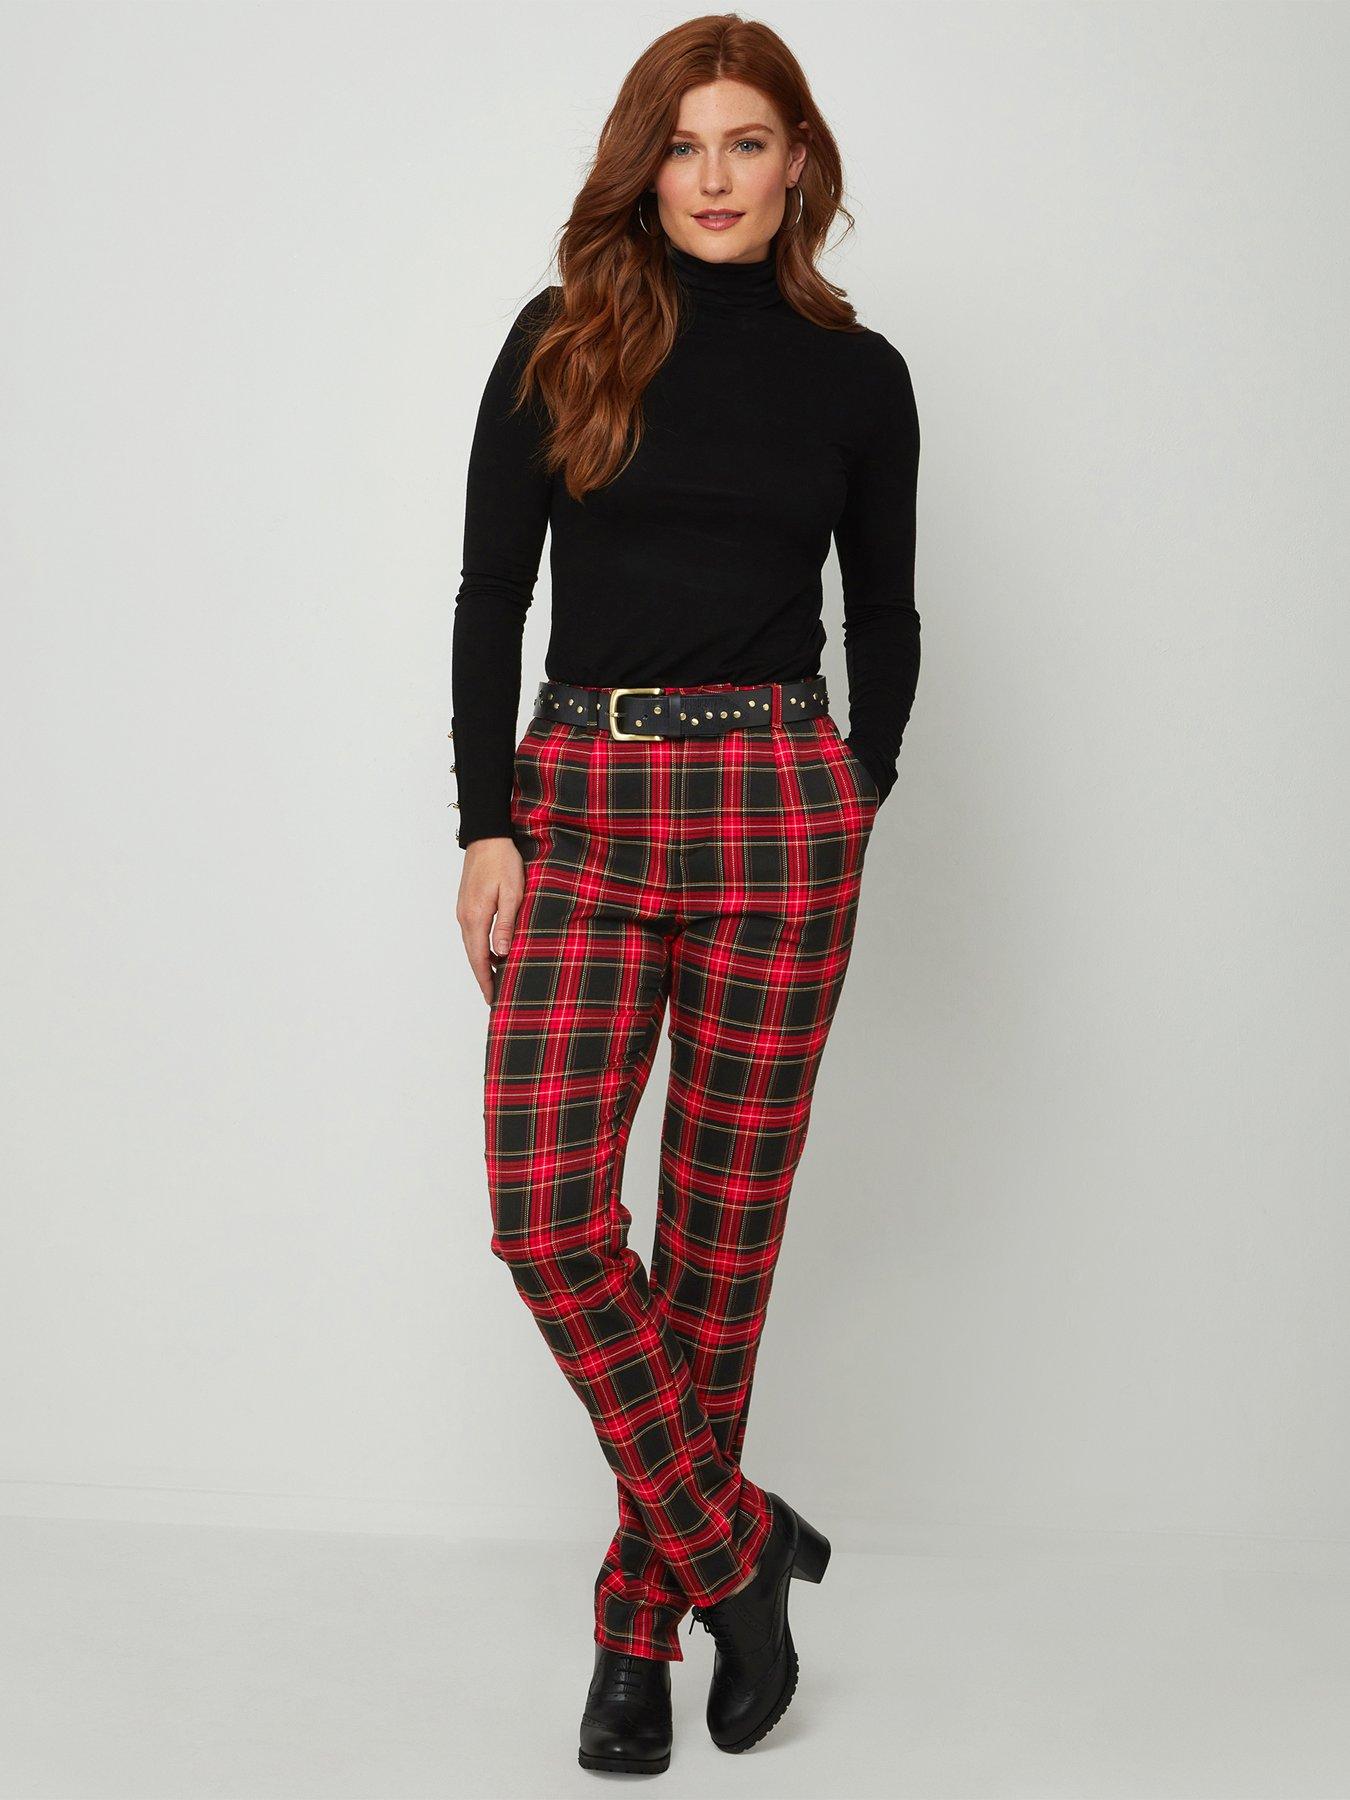 Women Cheeky Check Trousers Black/red -black/red